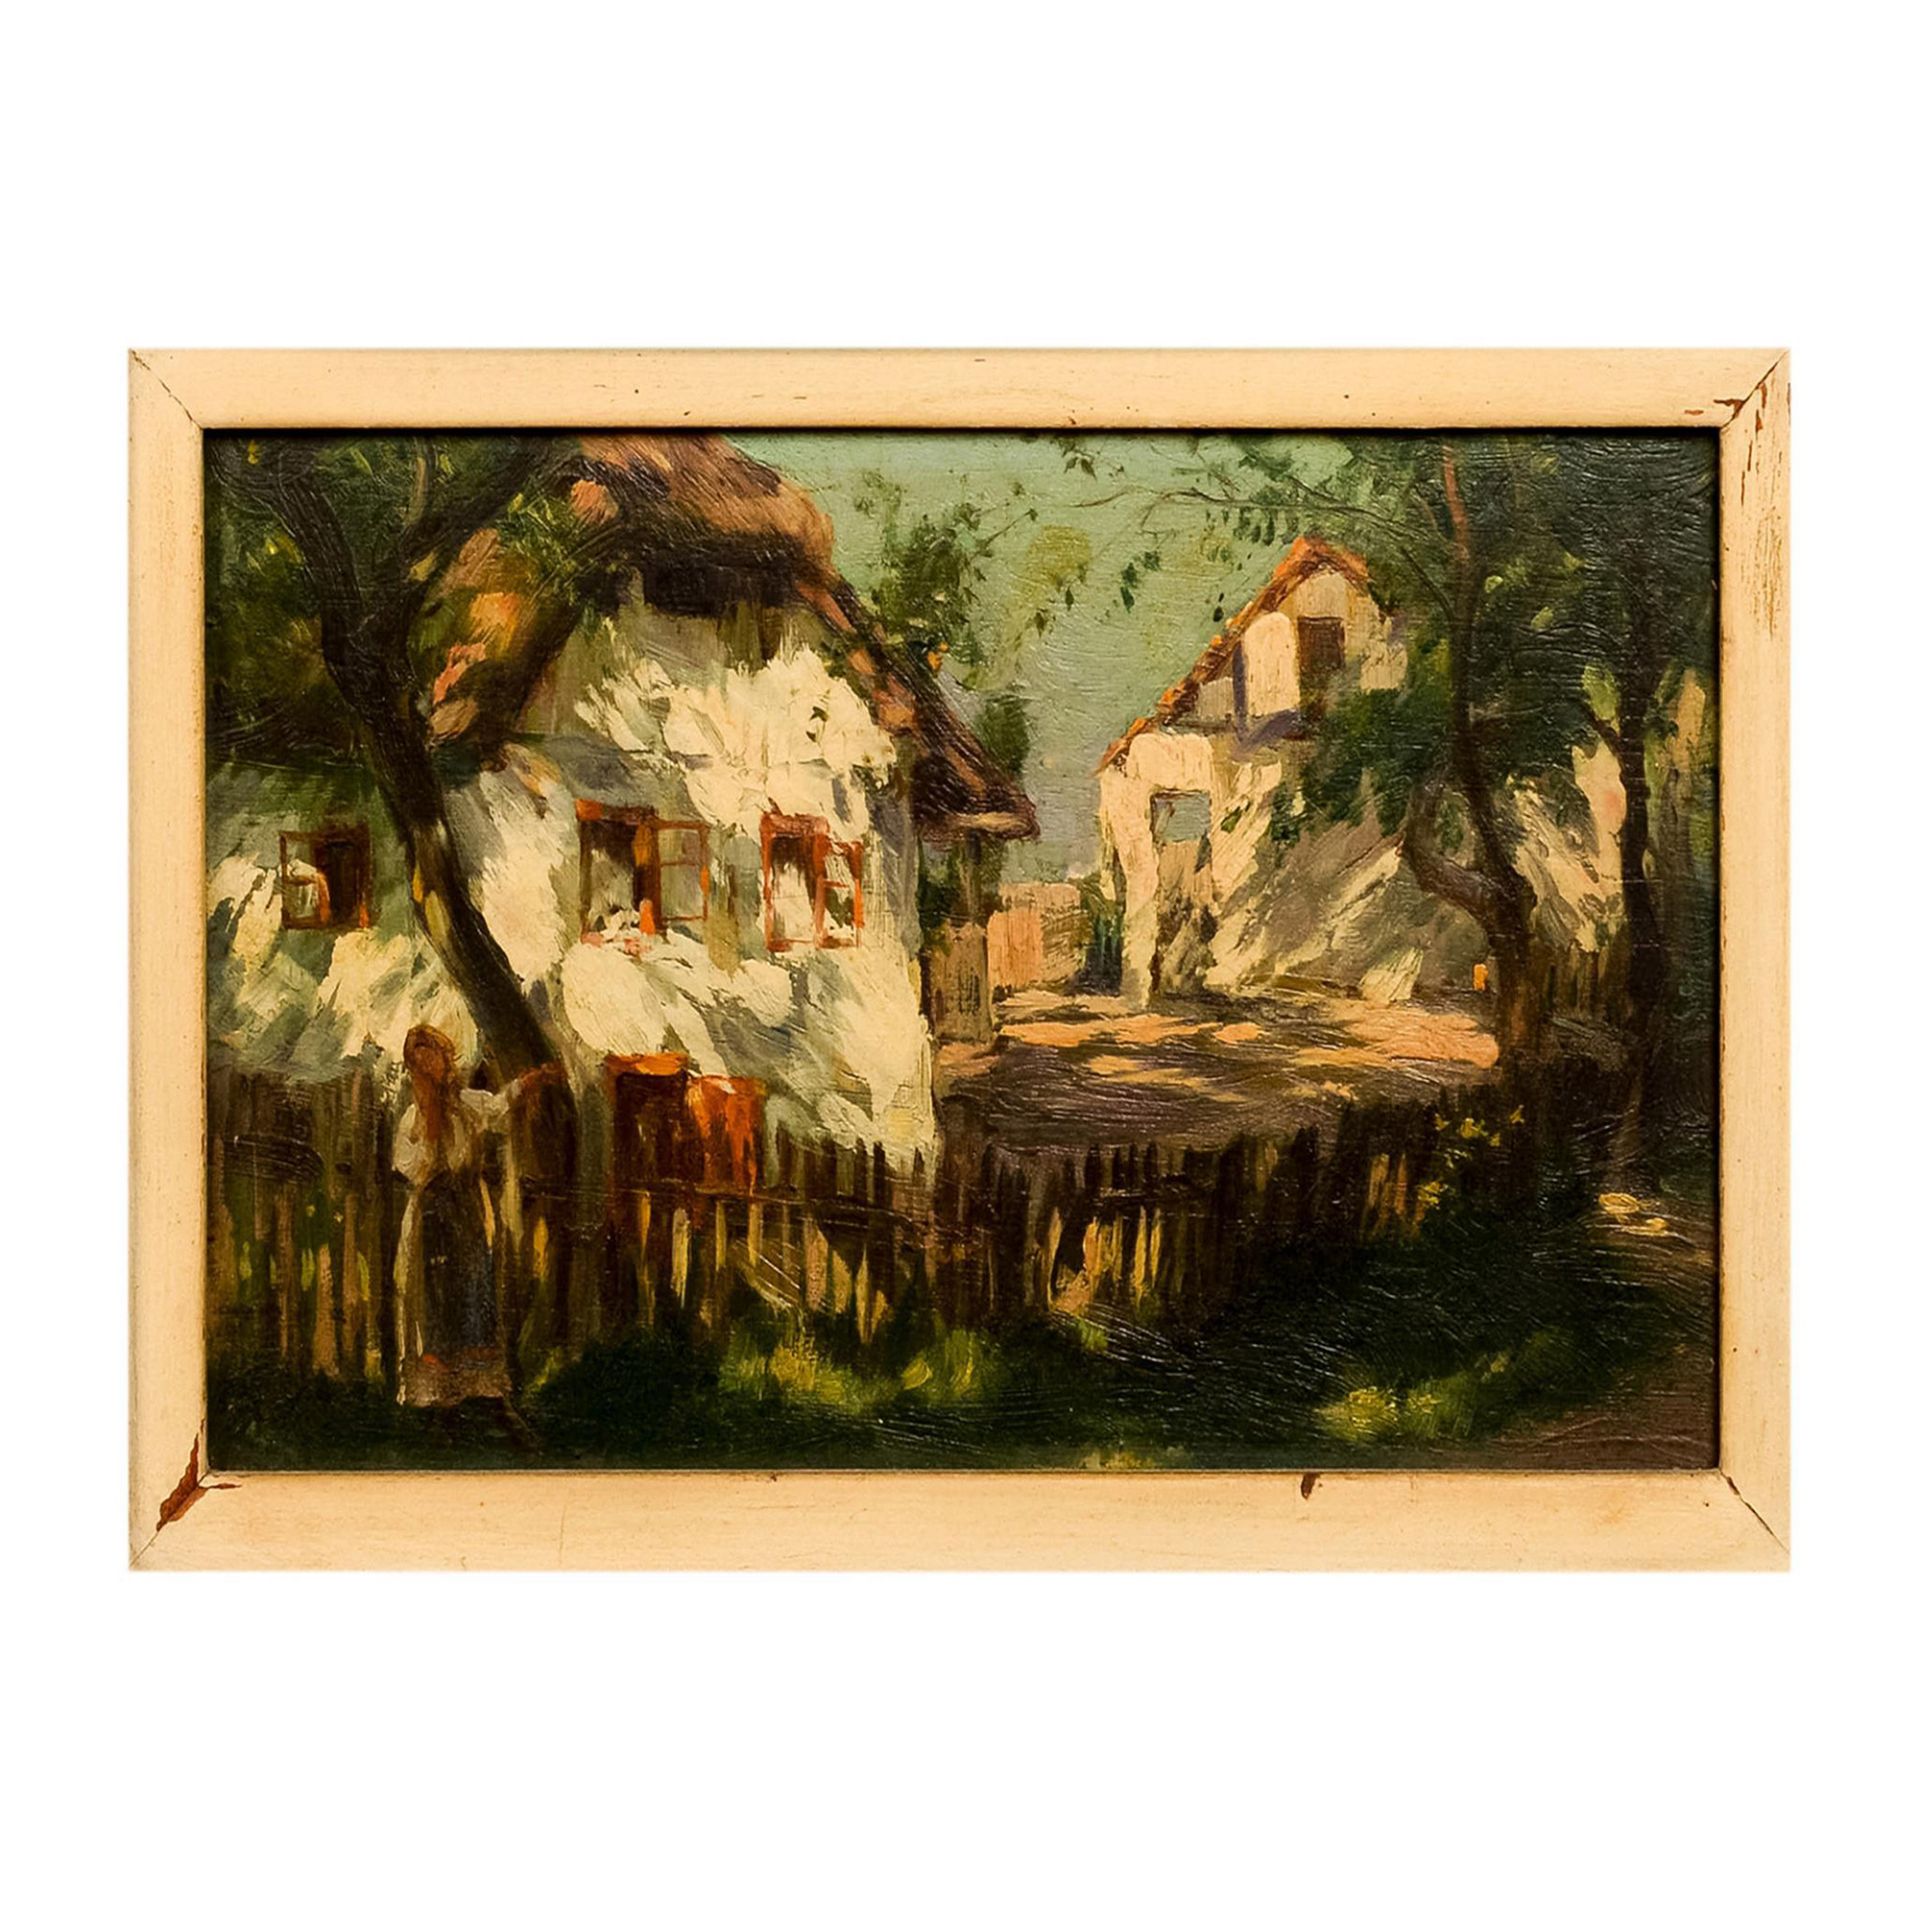 Oil on Board Painting of a Caribbean Village Scene - Image 2 of 5